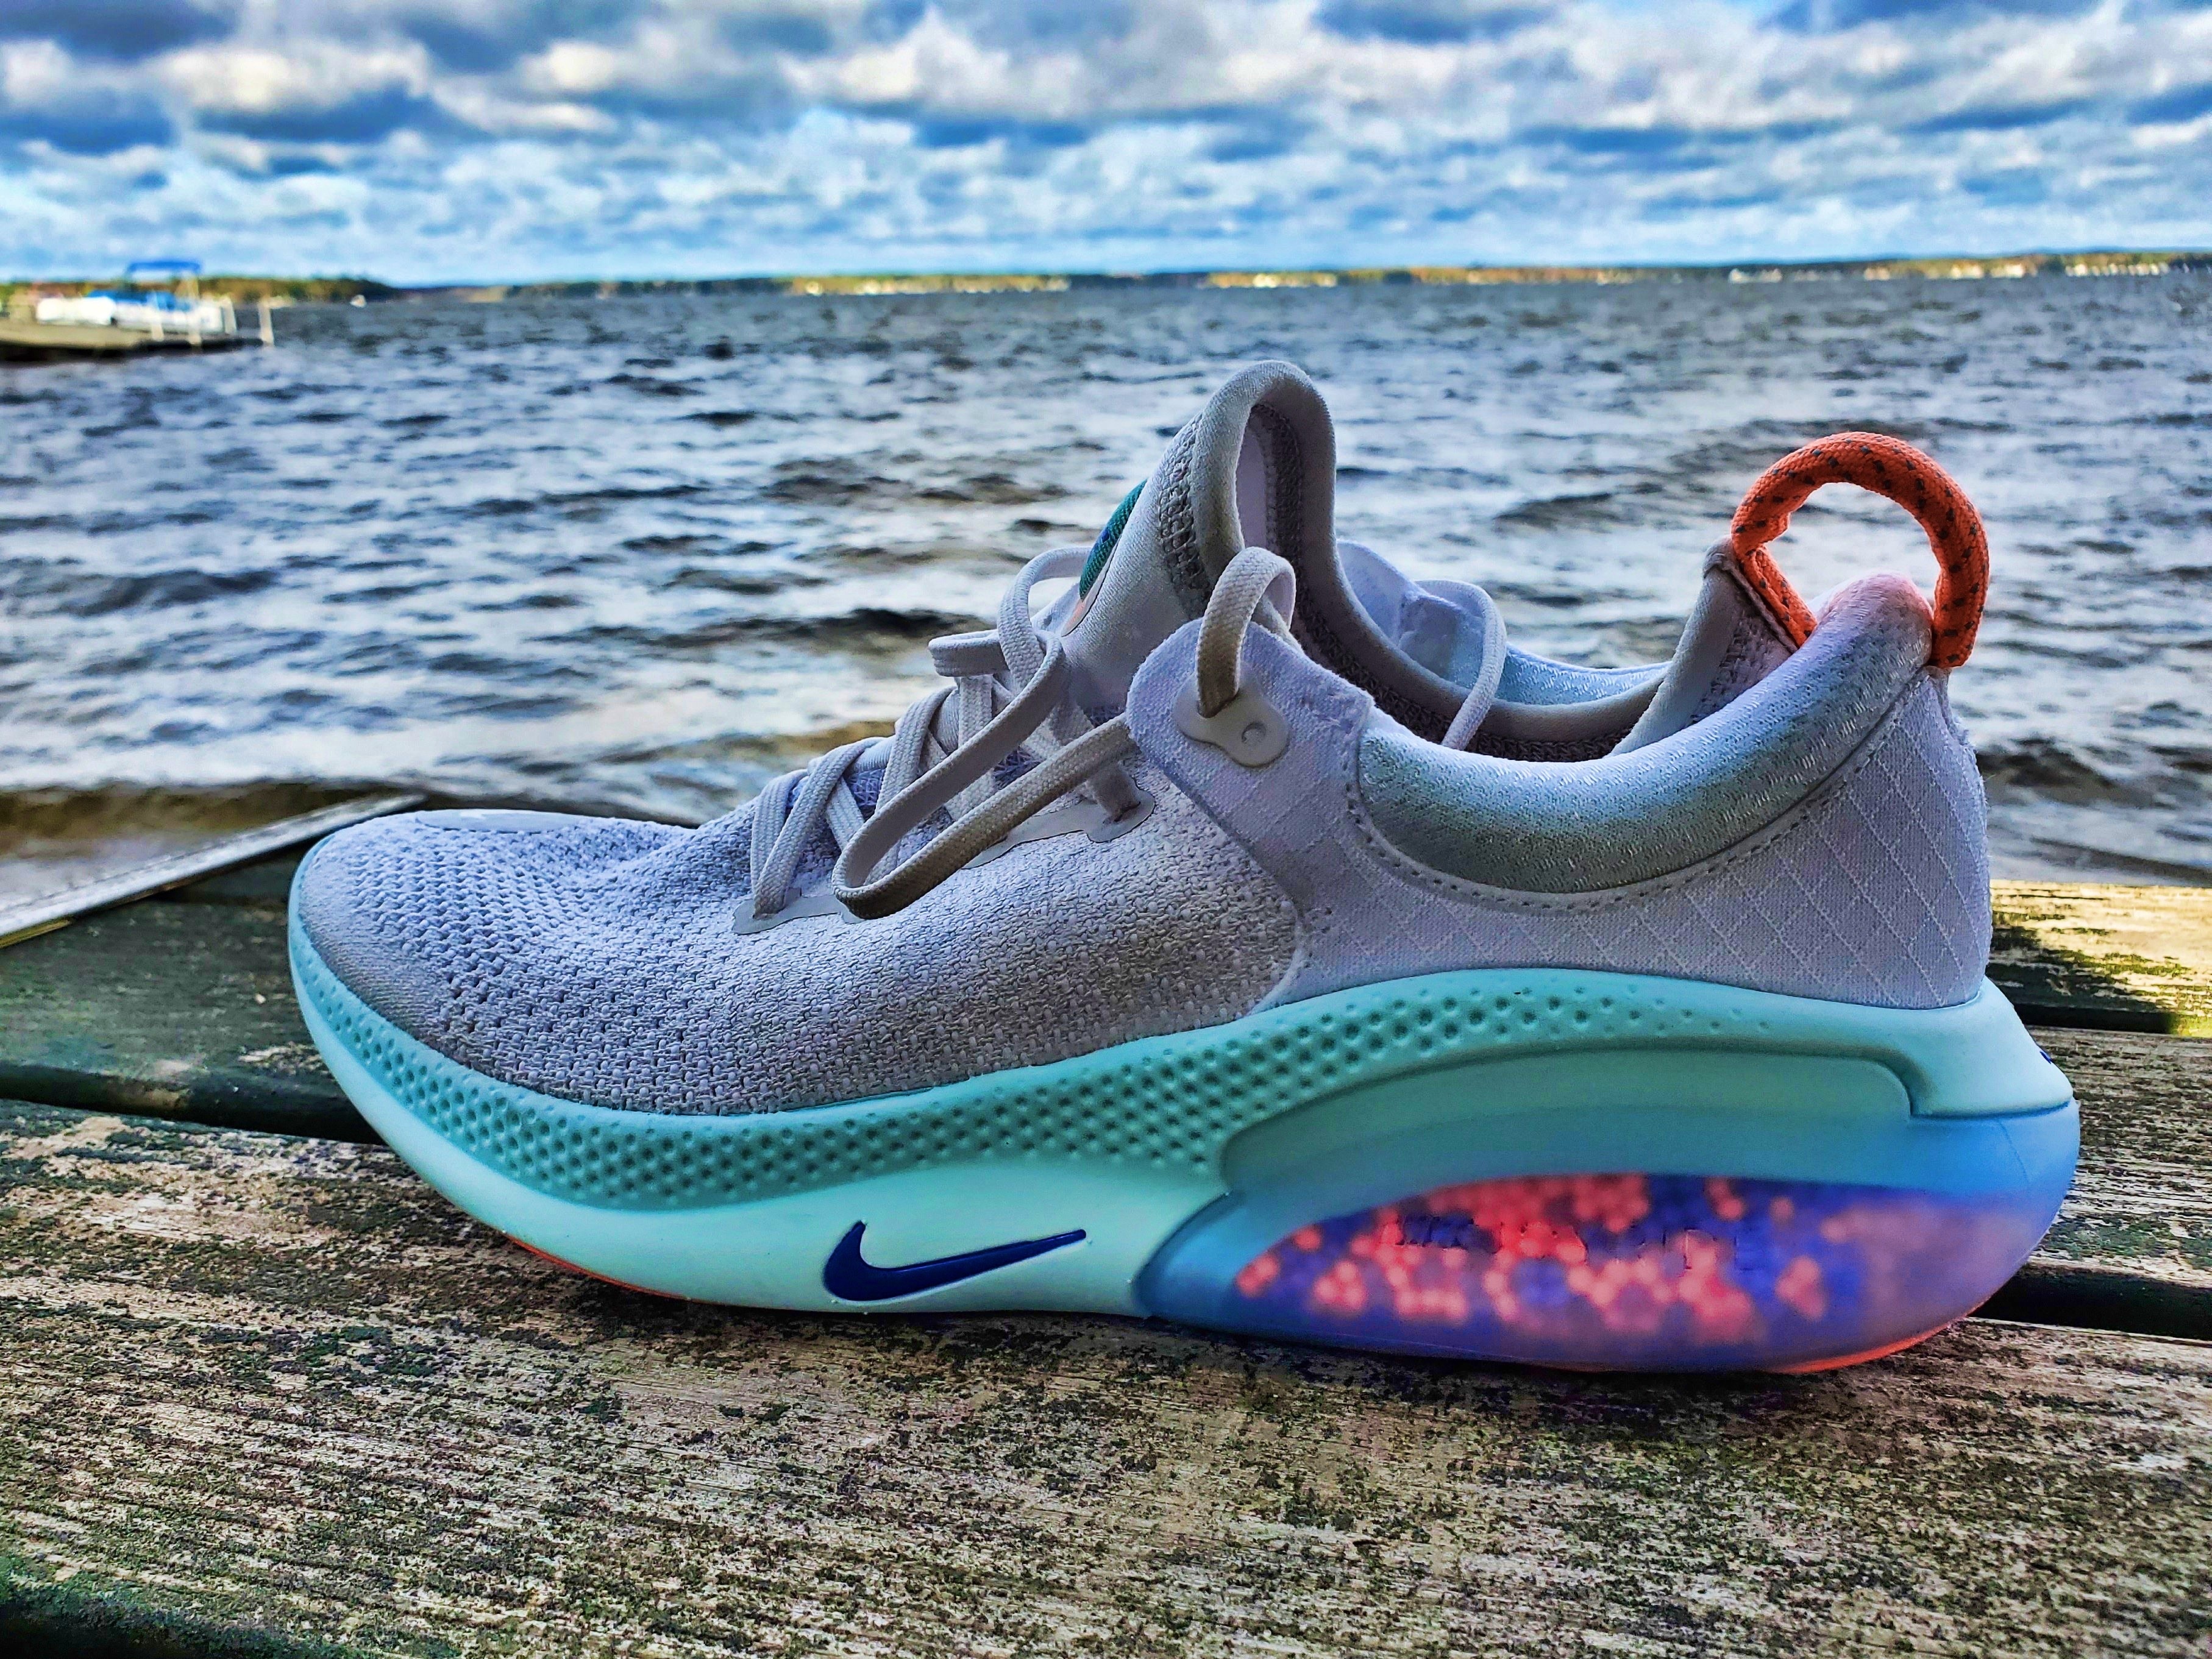 Nike Joyride Run Flyknit Shoes - Fitness Review | Busted ...